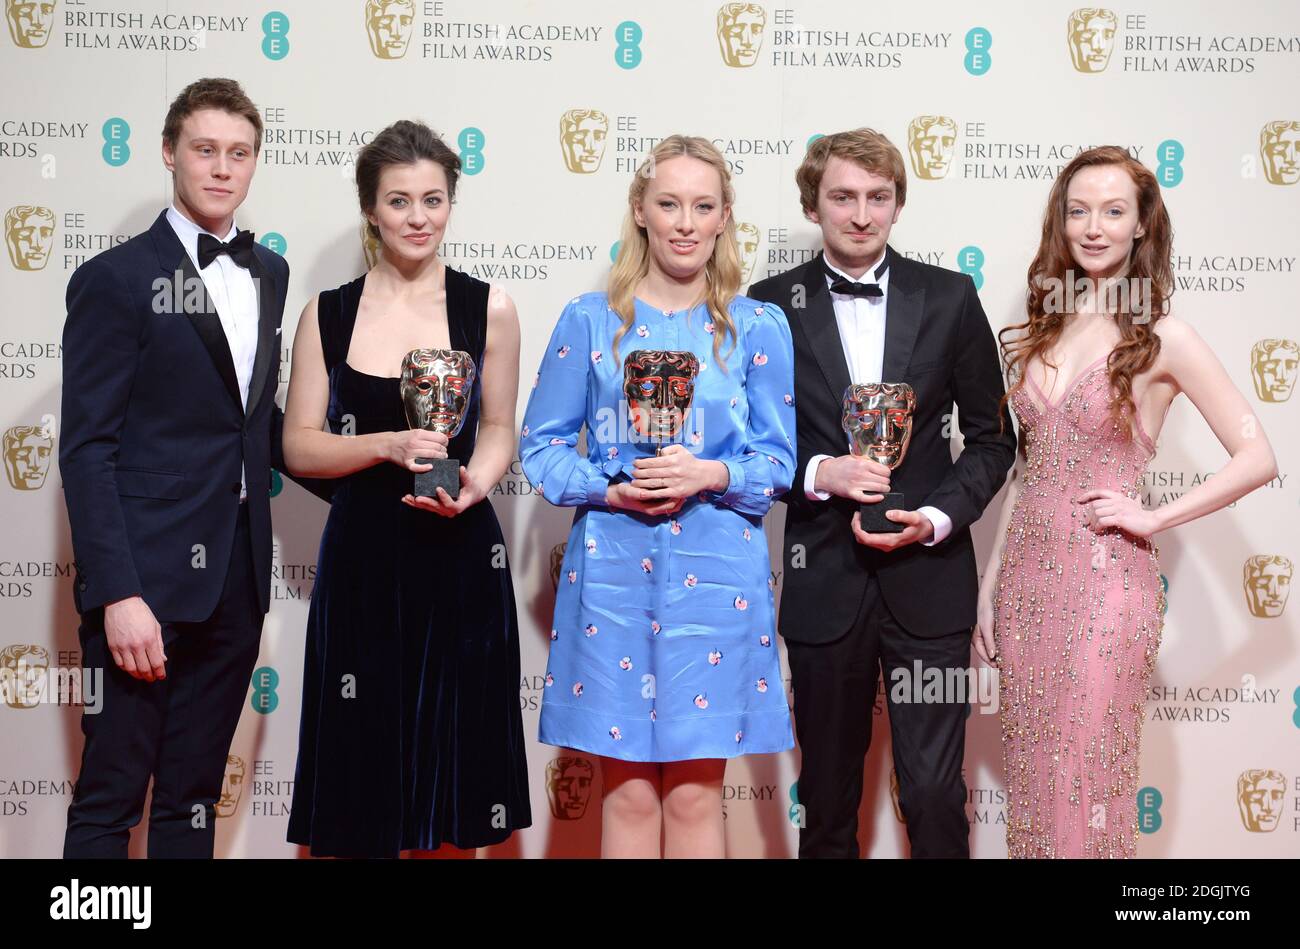 George MacKay and Olivia Grant in the Press Room at the EE British Academy Film Awards 2015, with the Best Animated Short Winners Jennifer Majka, Daisy Jacobs and Chris Hees (The Bigger Picture) held at the Royal Opera House in Covent Garden, London UK. Stock Photo